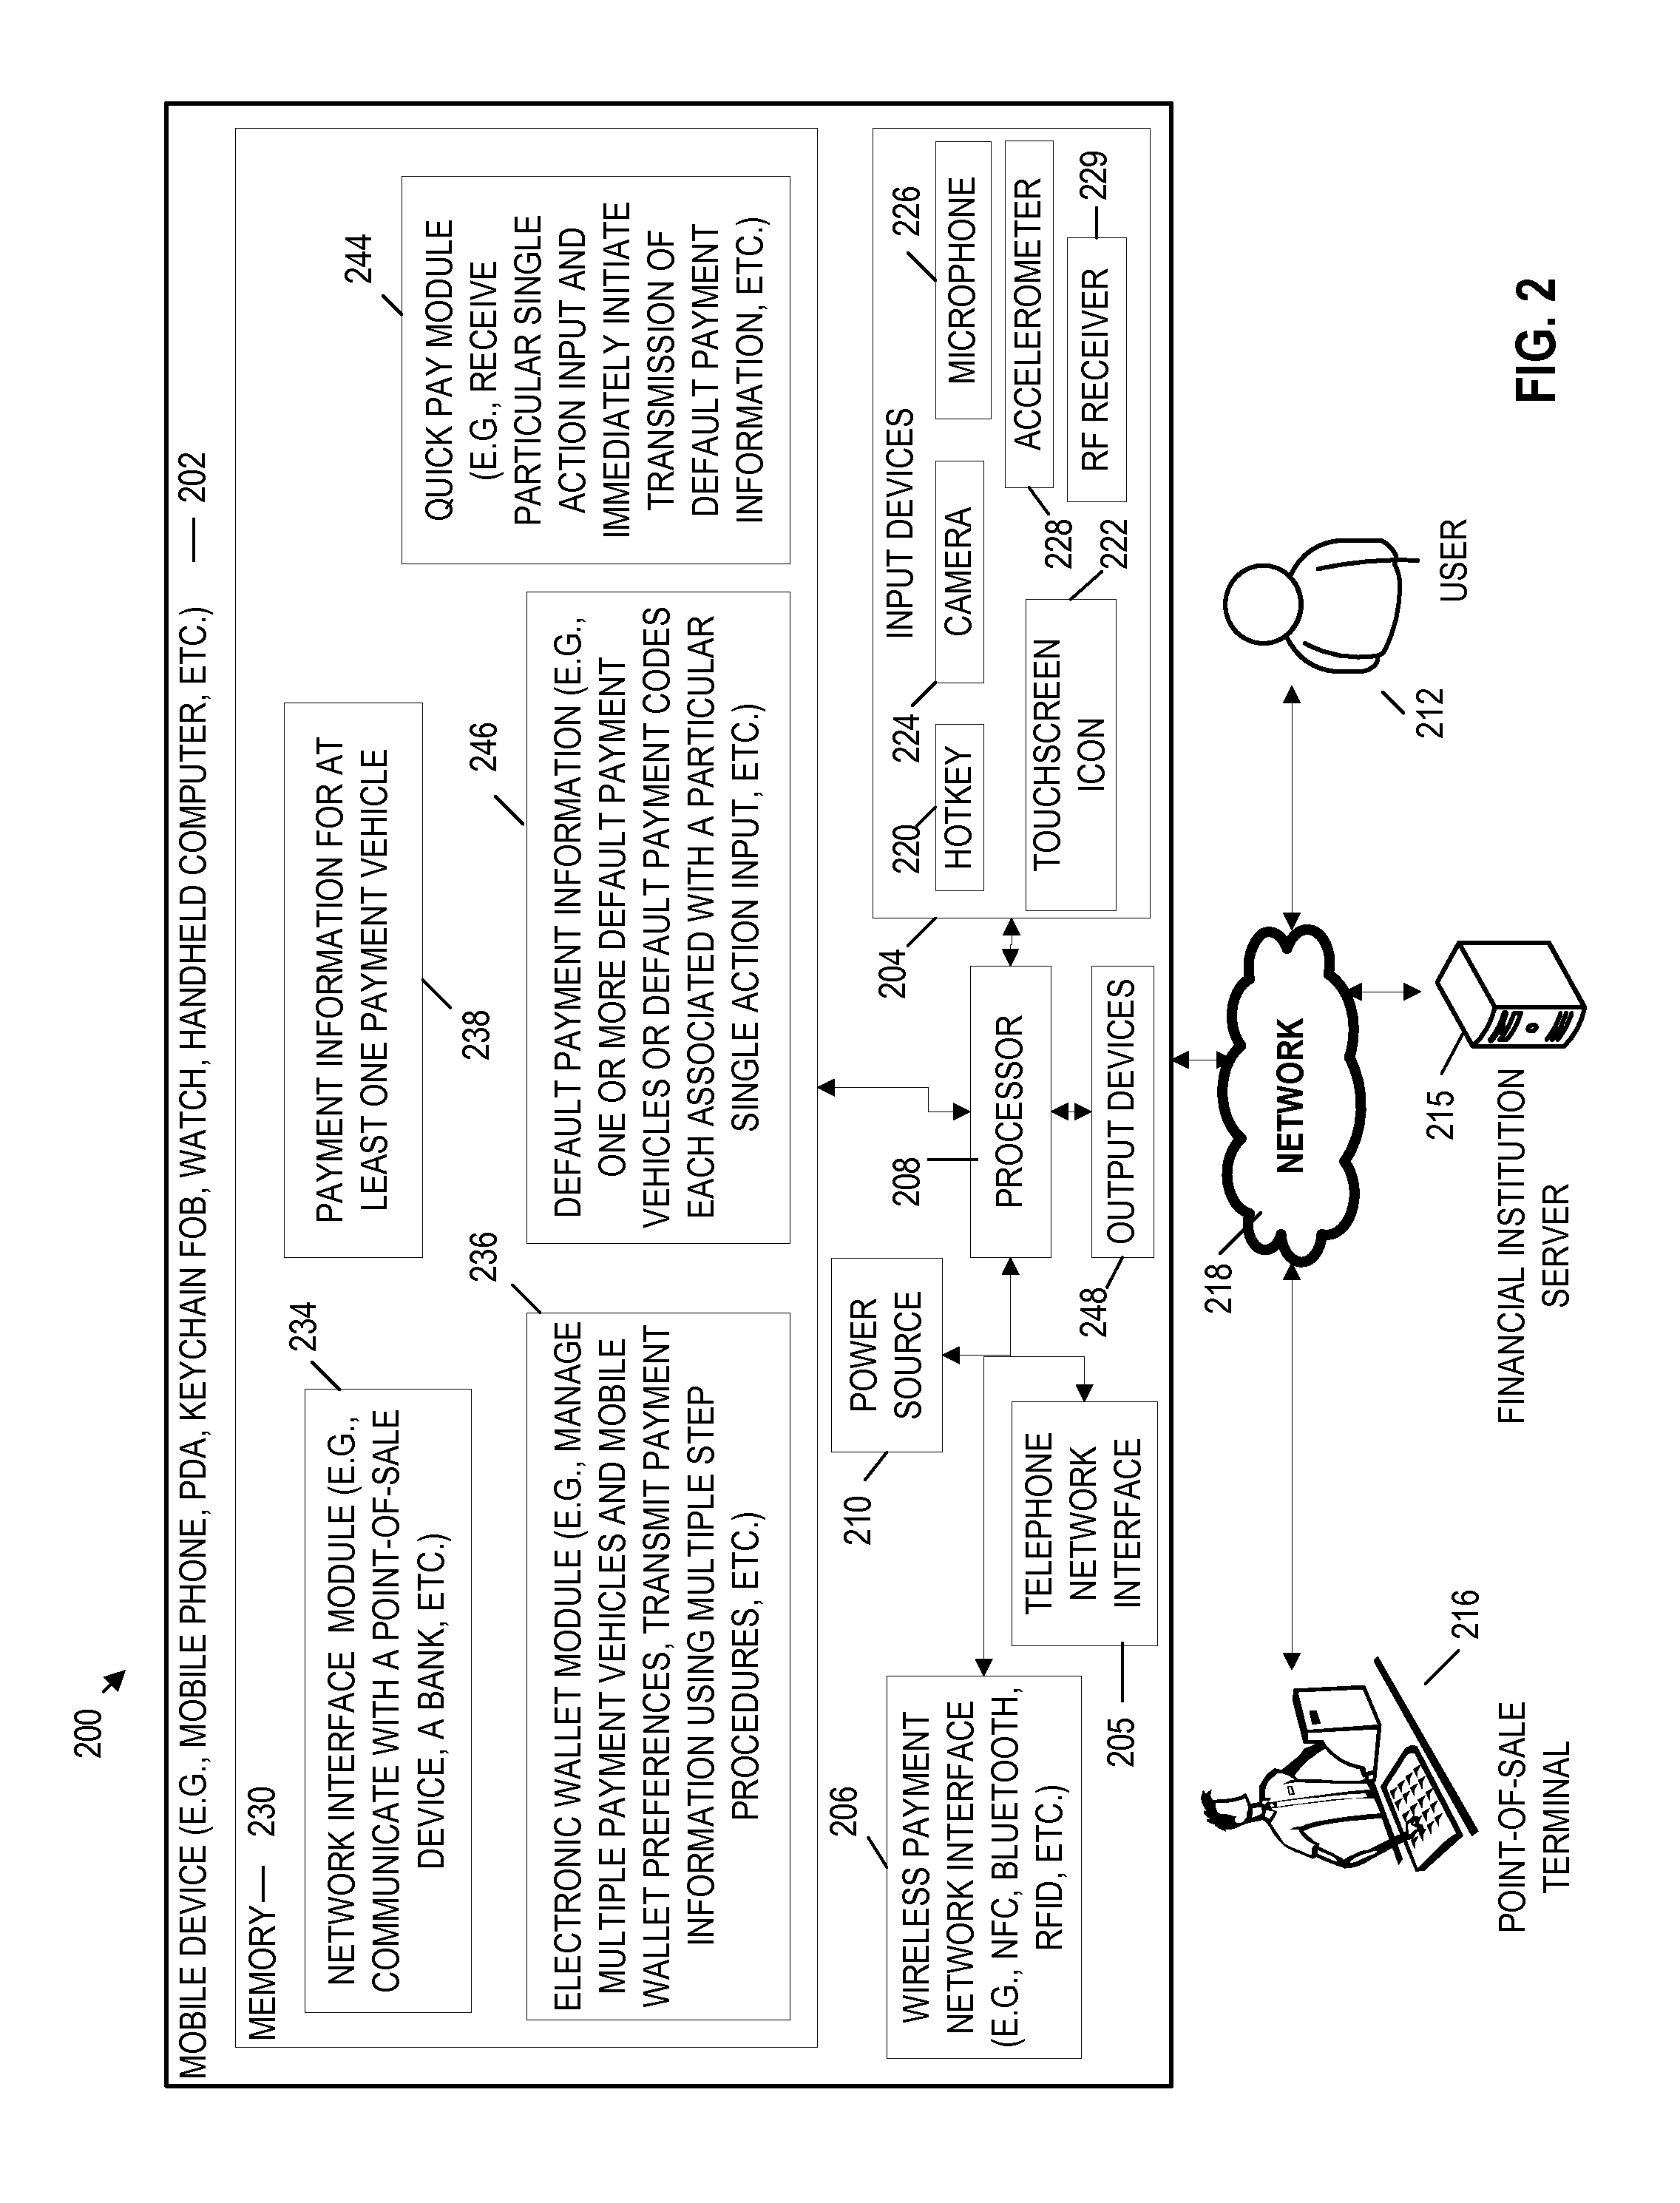 Transaction authorization system for a mobile commerce device